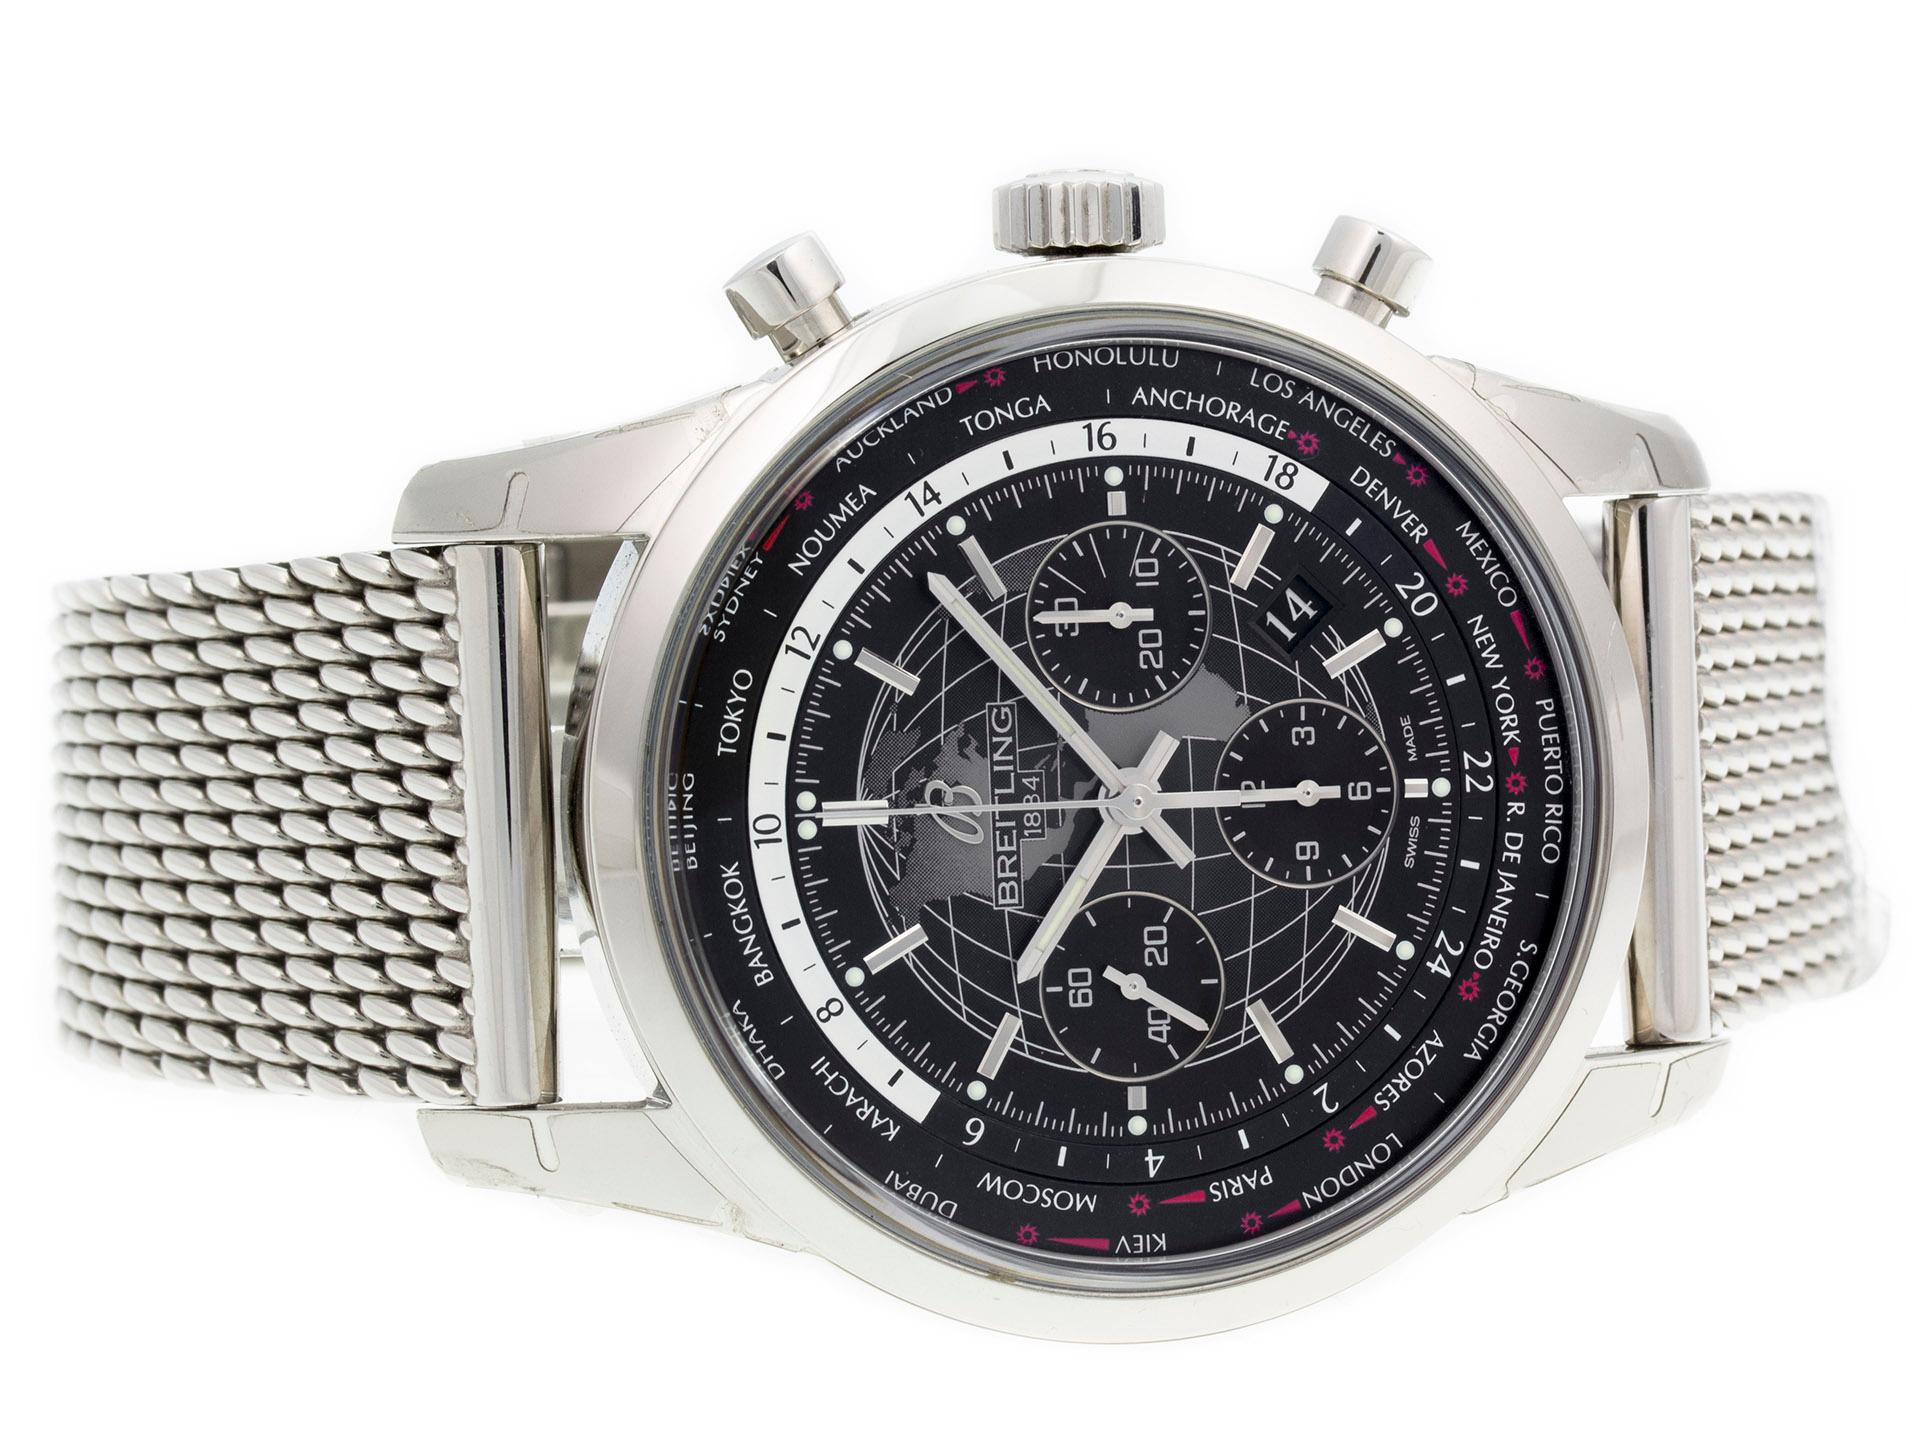 Stainless steel Breitling Transocean Chrono Unitime AB0510U4/BE84 watch, water resistant to 100m, with date, chronograph, world time, and bracelet.

Watch	
Brand:	Breitling
Series:	Transocean Chrono Unitime
Model